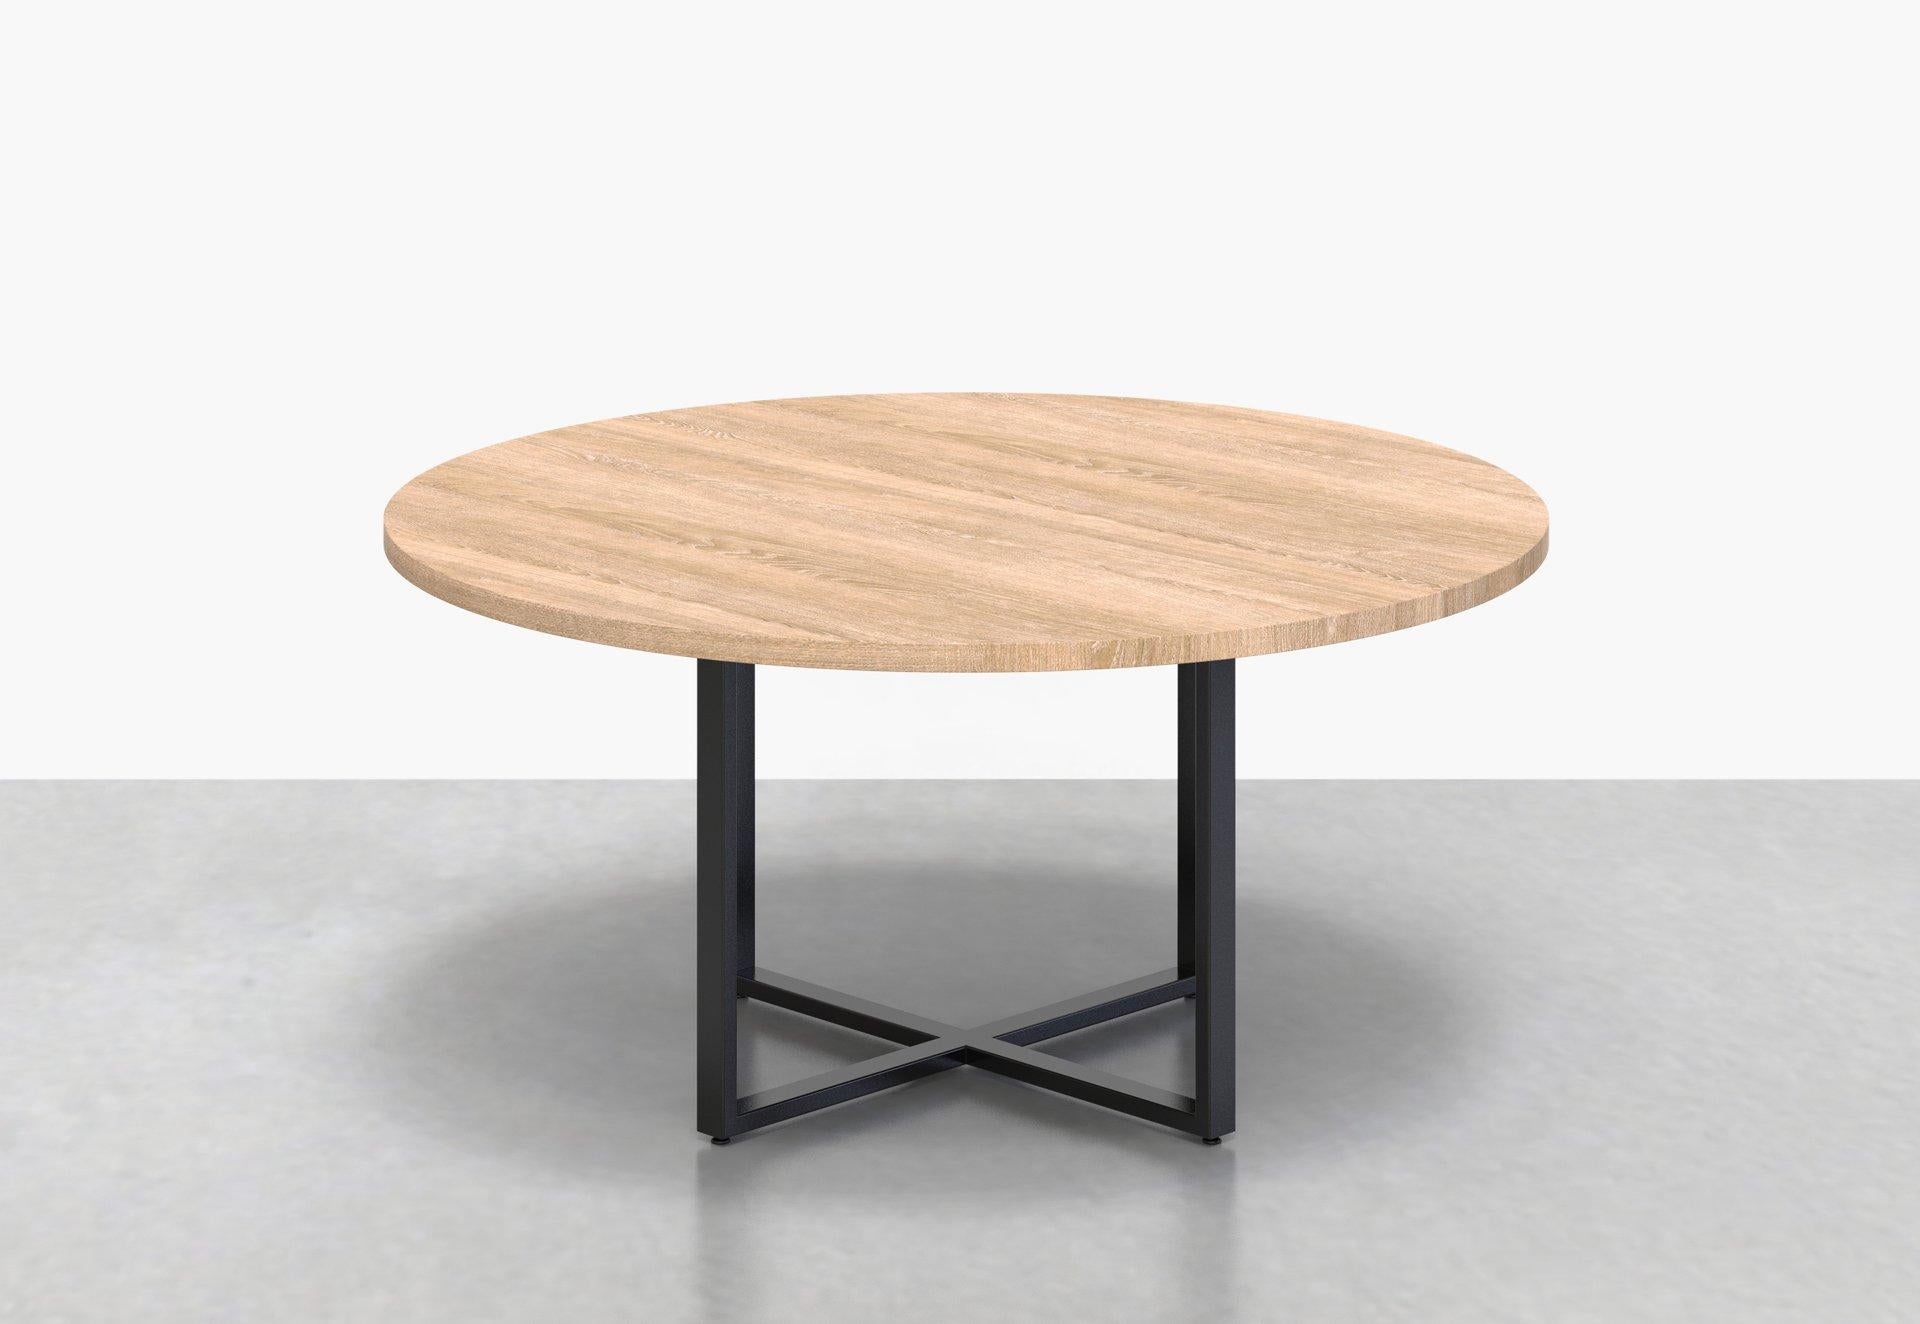 Paired back with Classic proportions, our Bowen round table adds subtle class to any space. The Bowen's steel base supports a thick wood top, and makes for the perfect gathering point.